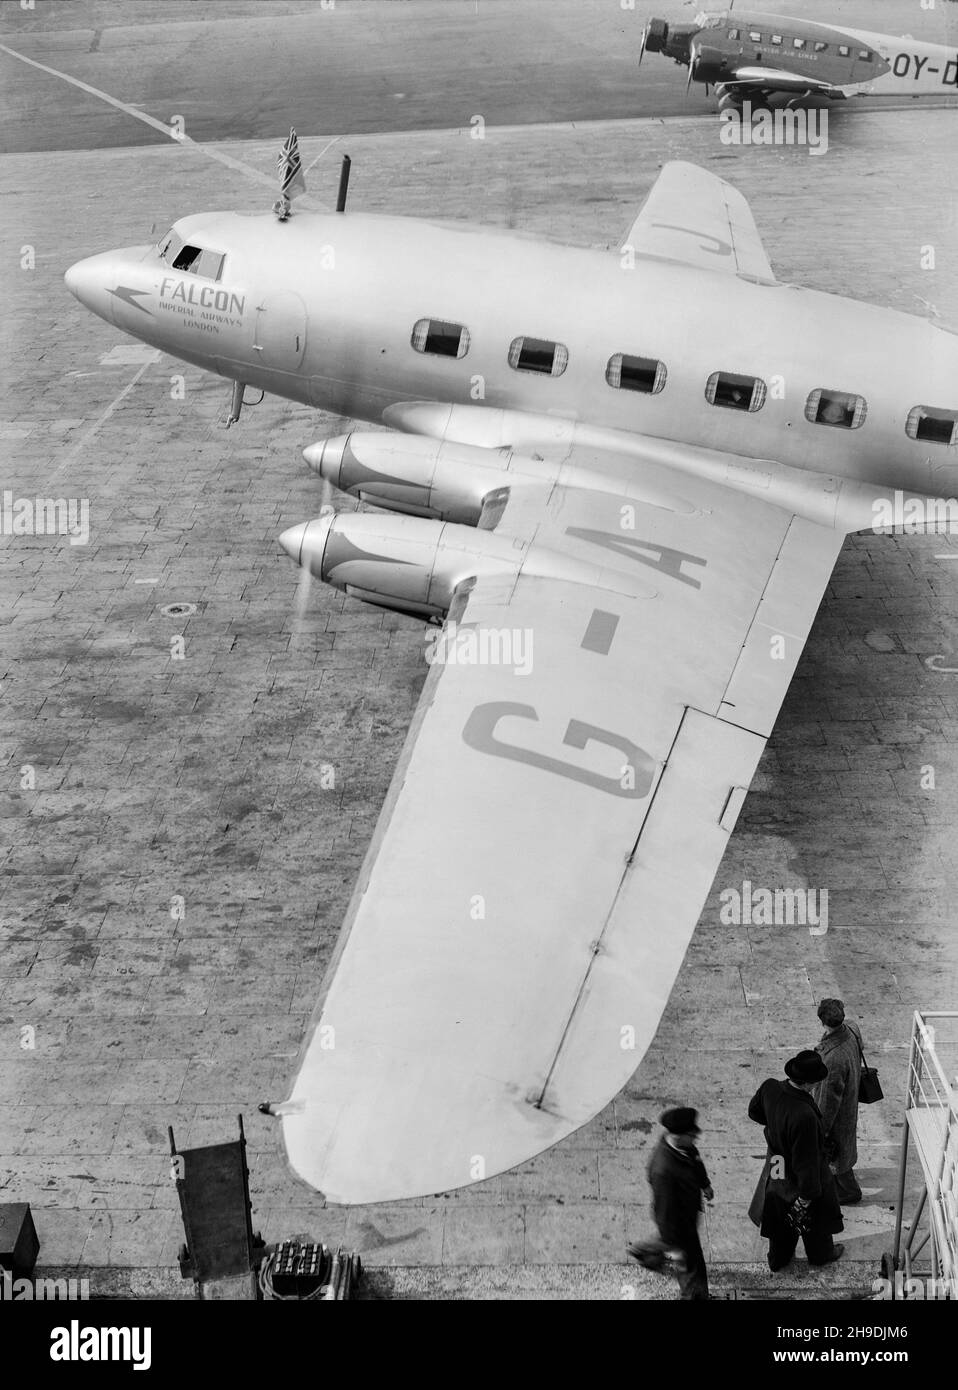 Vintage black and white photograph taken in 1938 showing a A De Havilland DH.91 Albatross, serial number G-AFDJ, named Falcon, of Imperial Airways at Croydon Aerodrome, outside London. Stock Photo